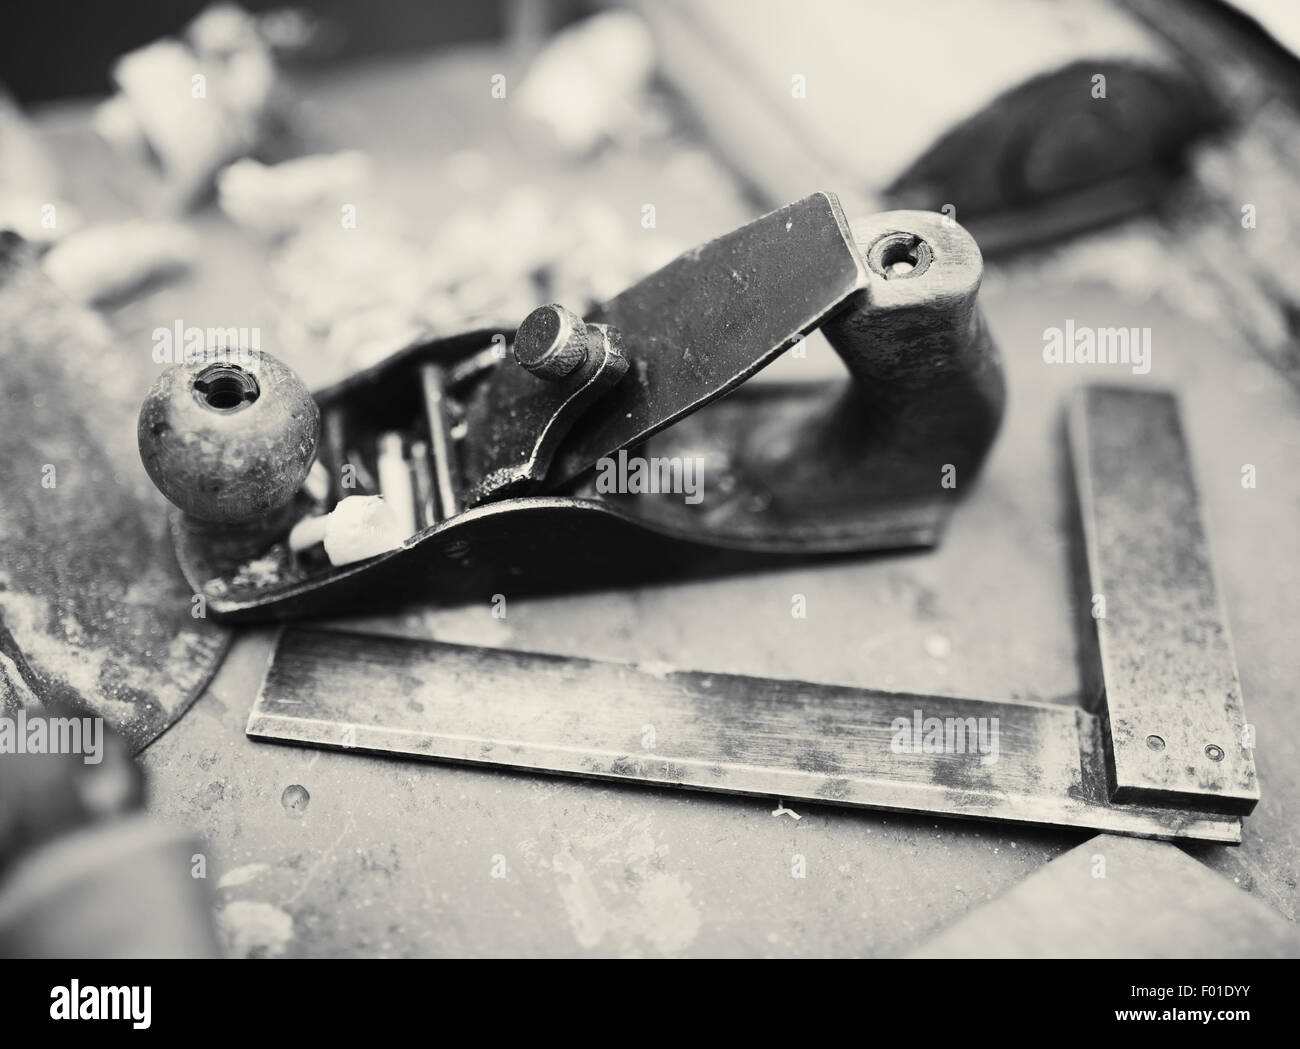 Desk of a carpenter with some tools, bw tinted photo Stock Photo